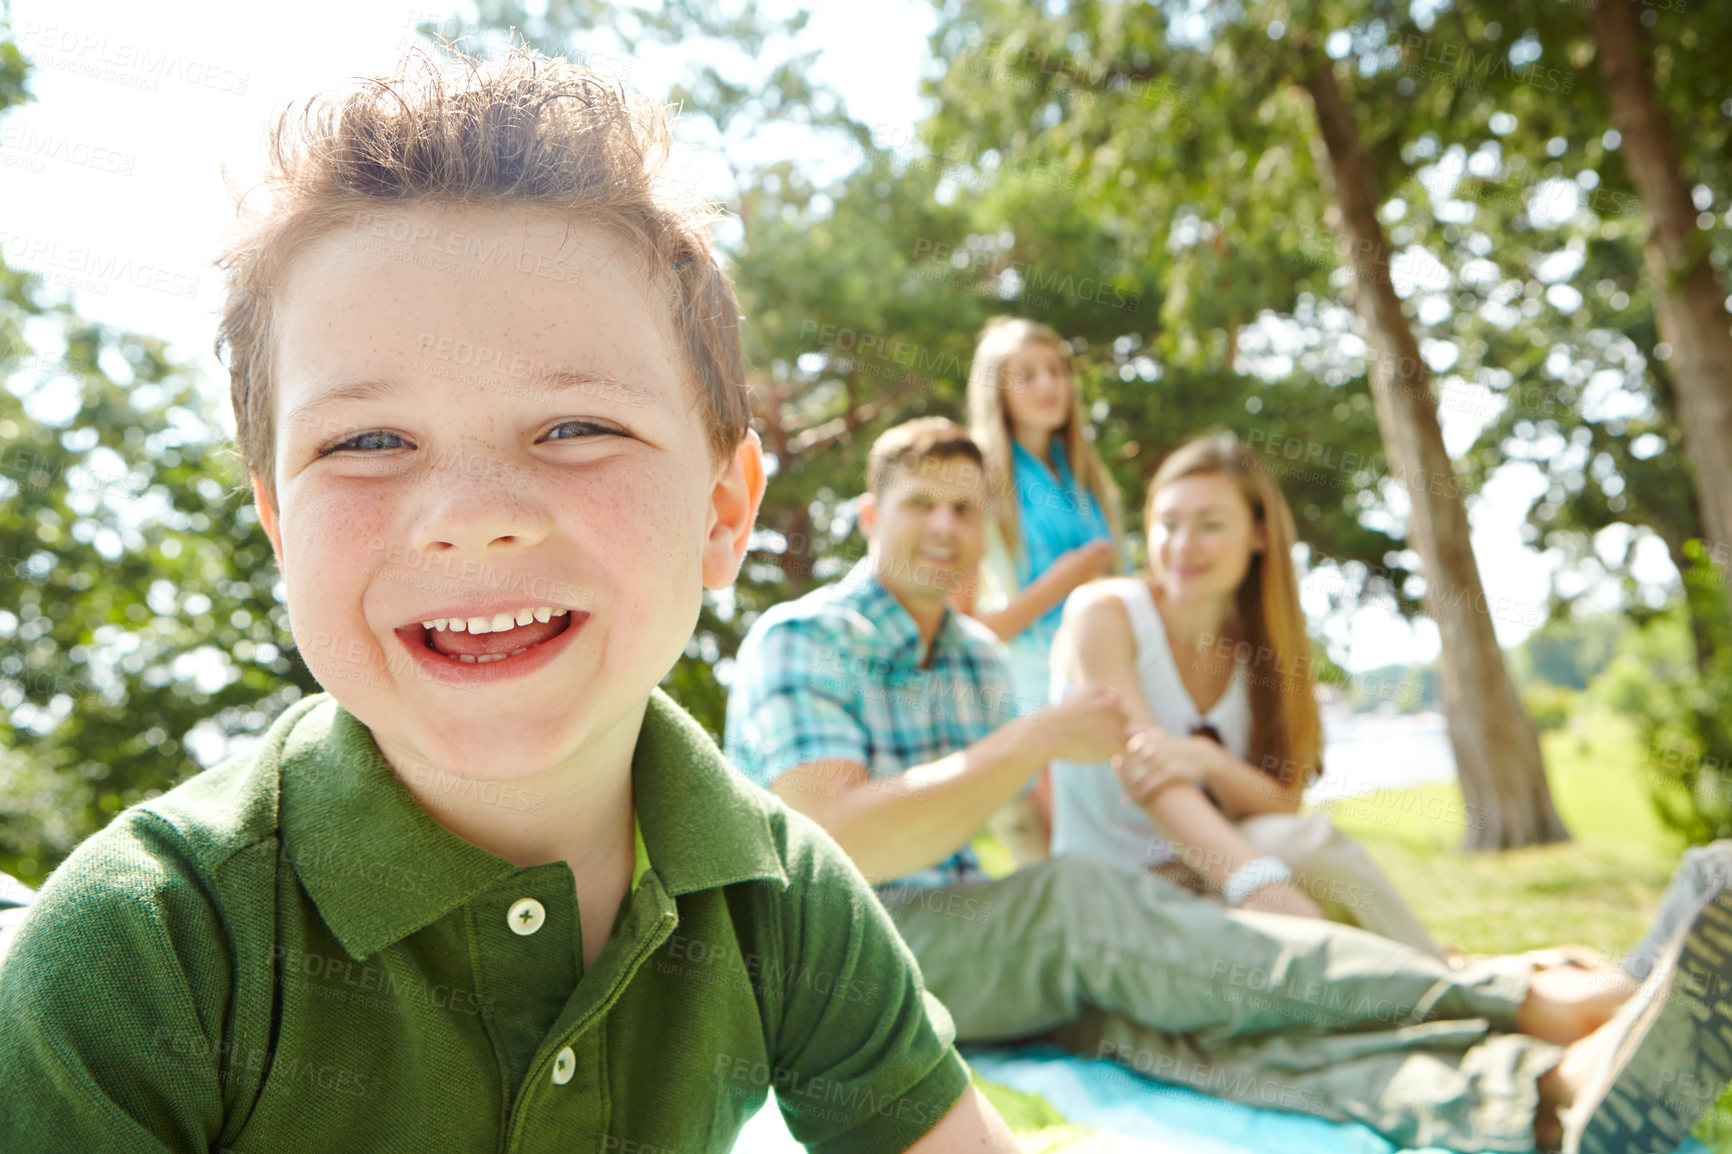 Buy stock photo A happy little boy sitting outdoors with his family on a sunny day